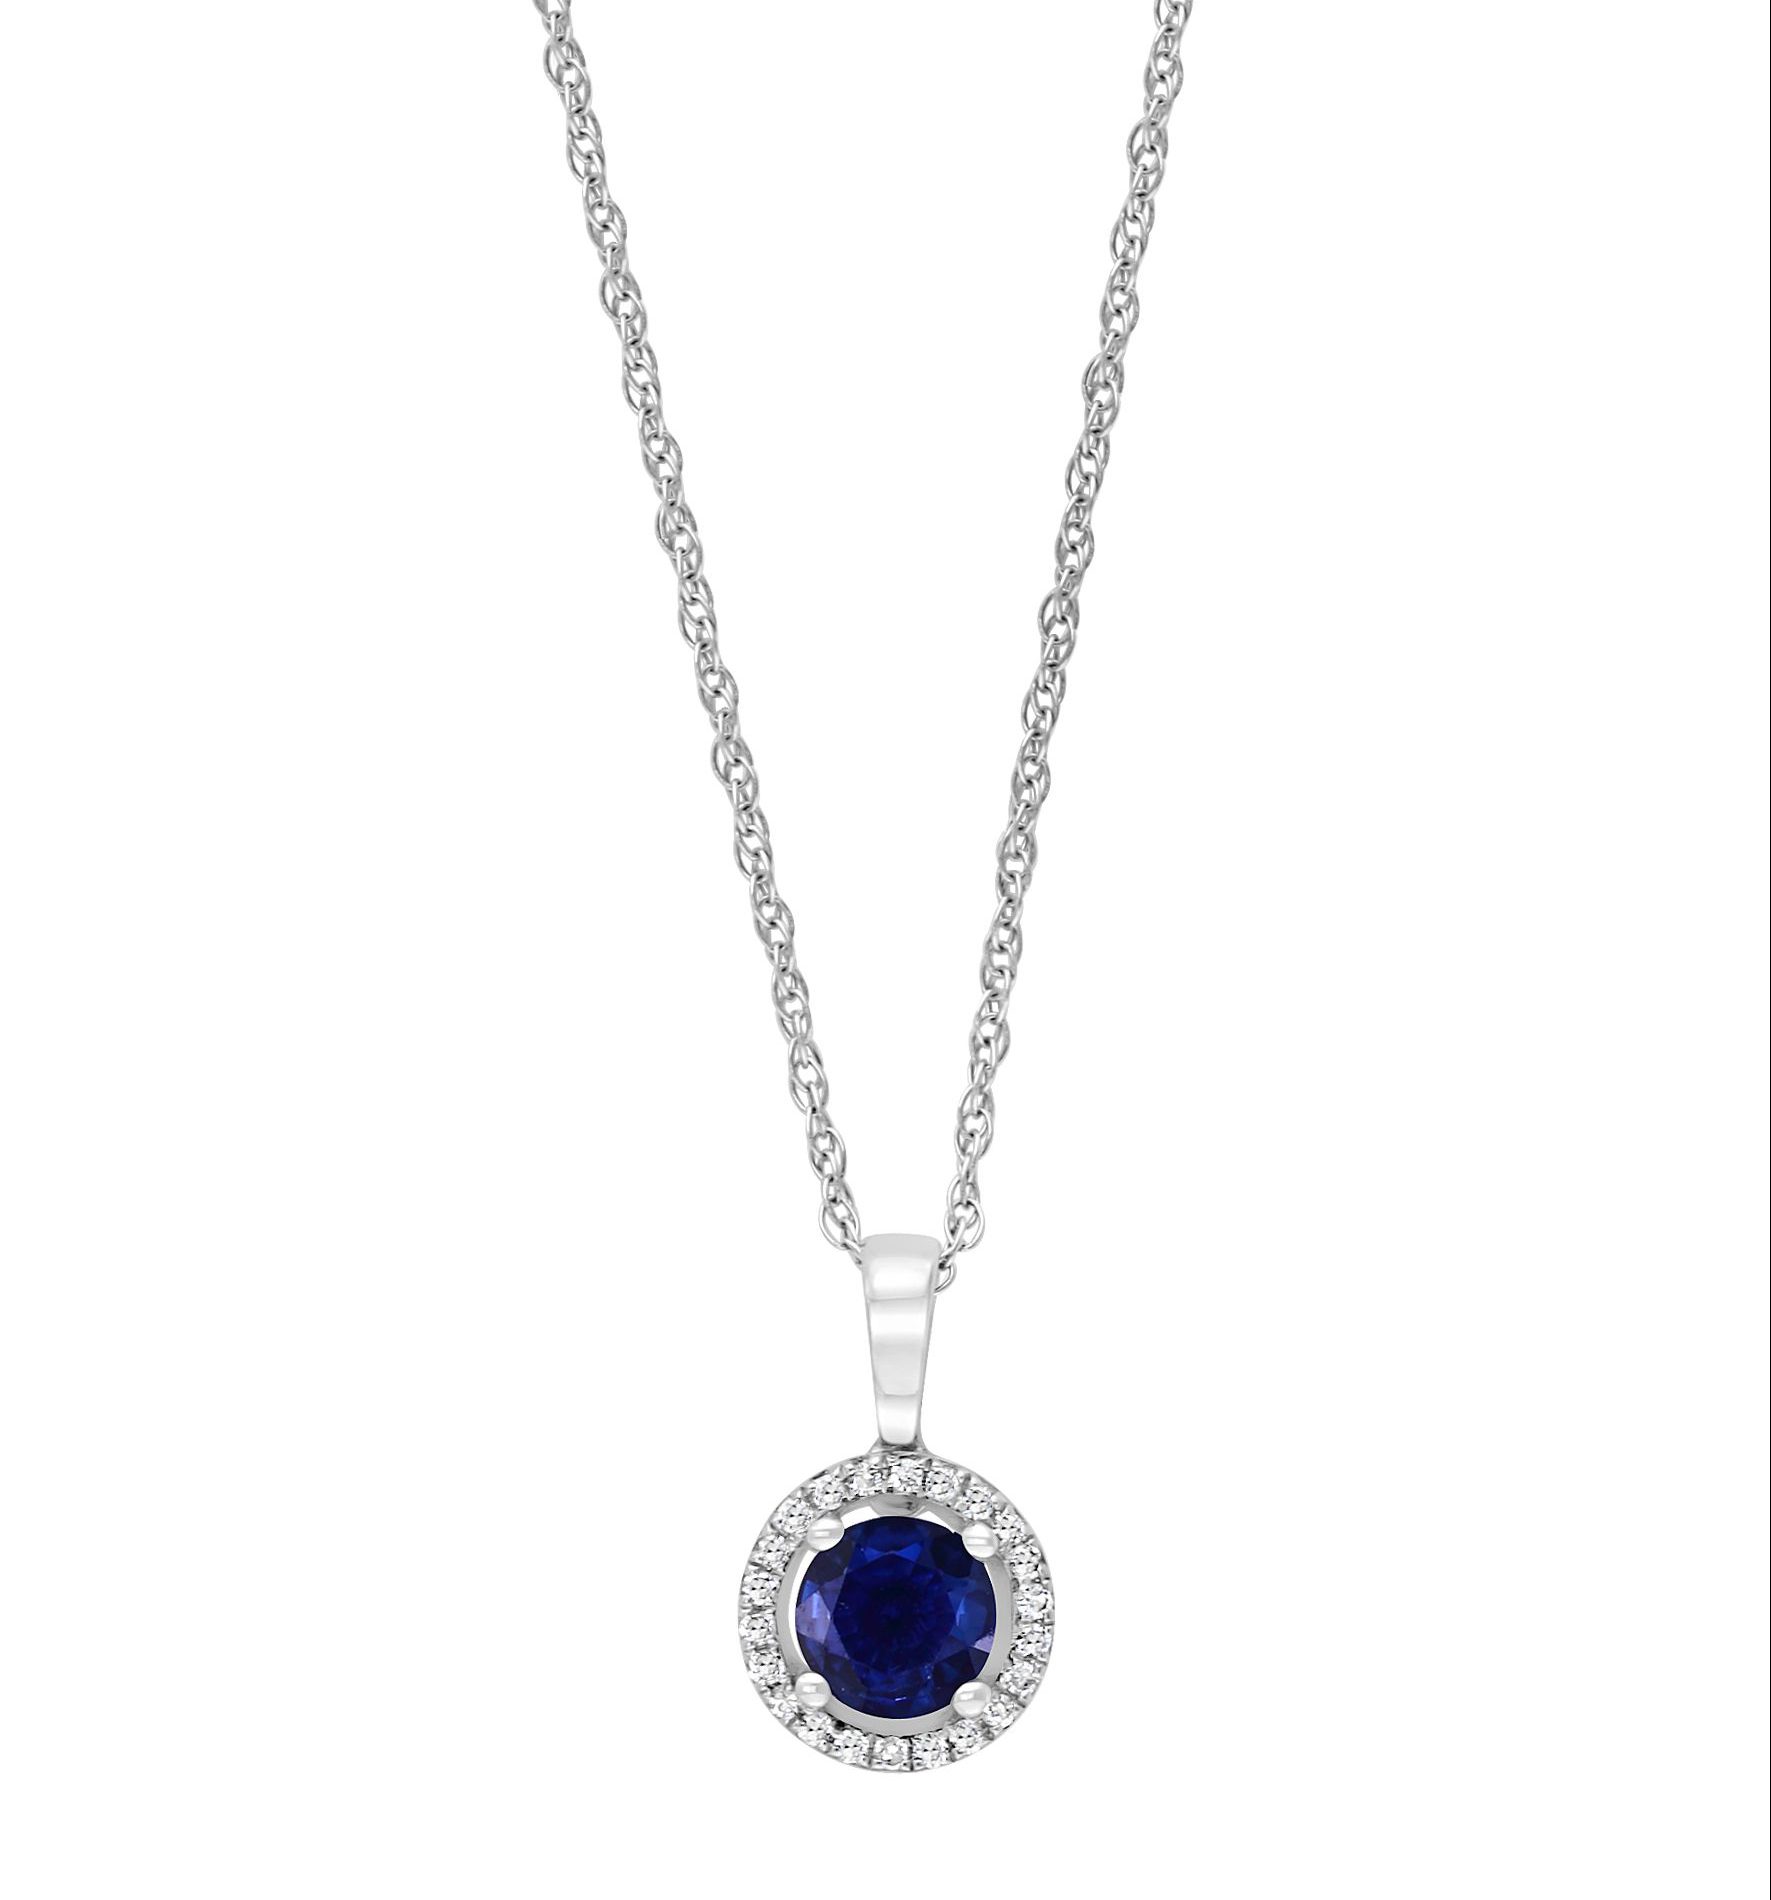 Ready to Ship Gemma 0.59ct 14kt White Gold Teal Sapphire Diamond Round Halo  Necklace,Unique Sapphire Necklace,Anniversary Gift,Birthday Gift